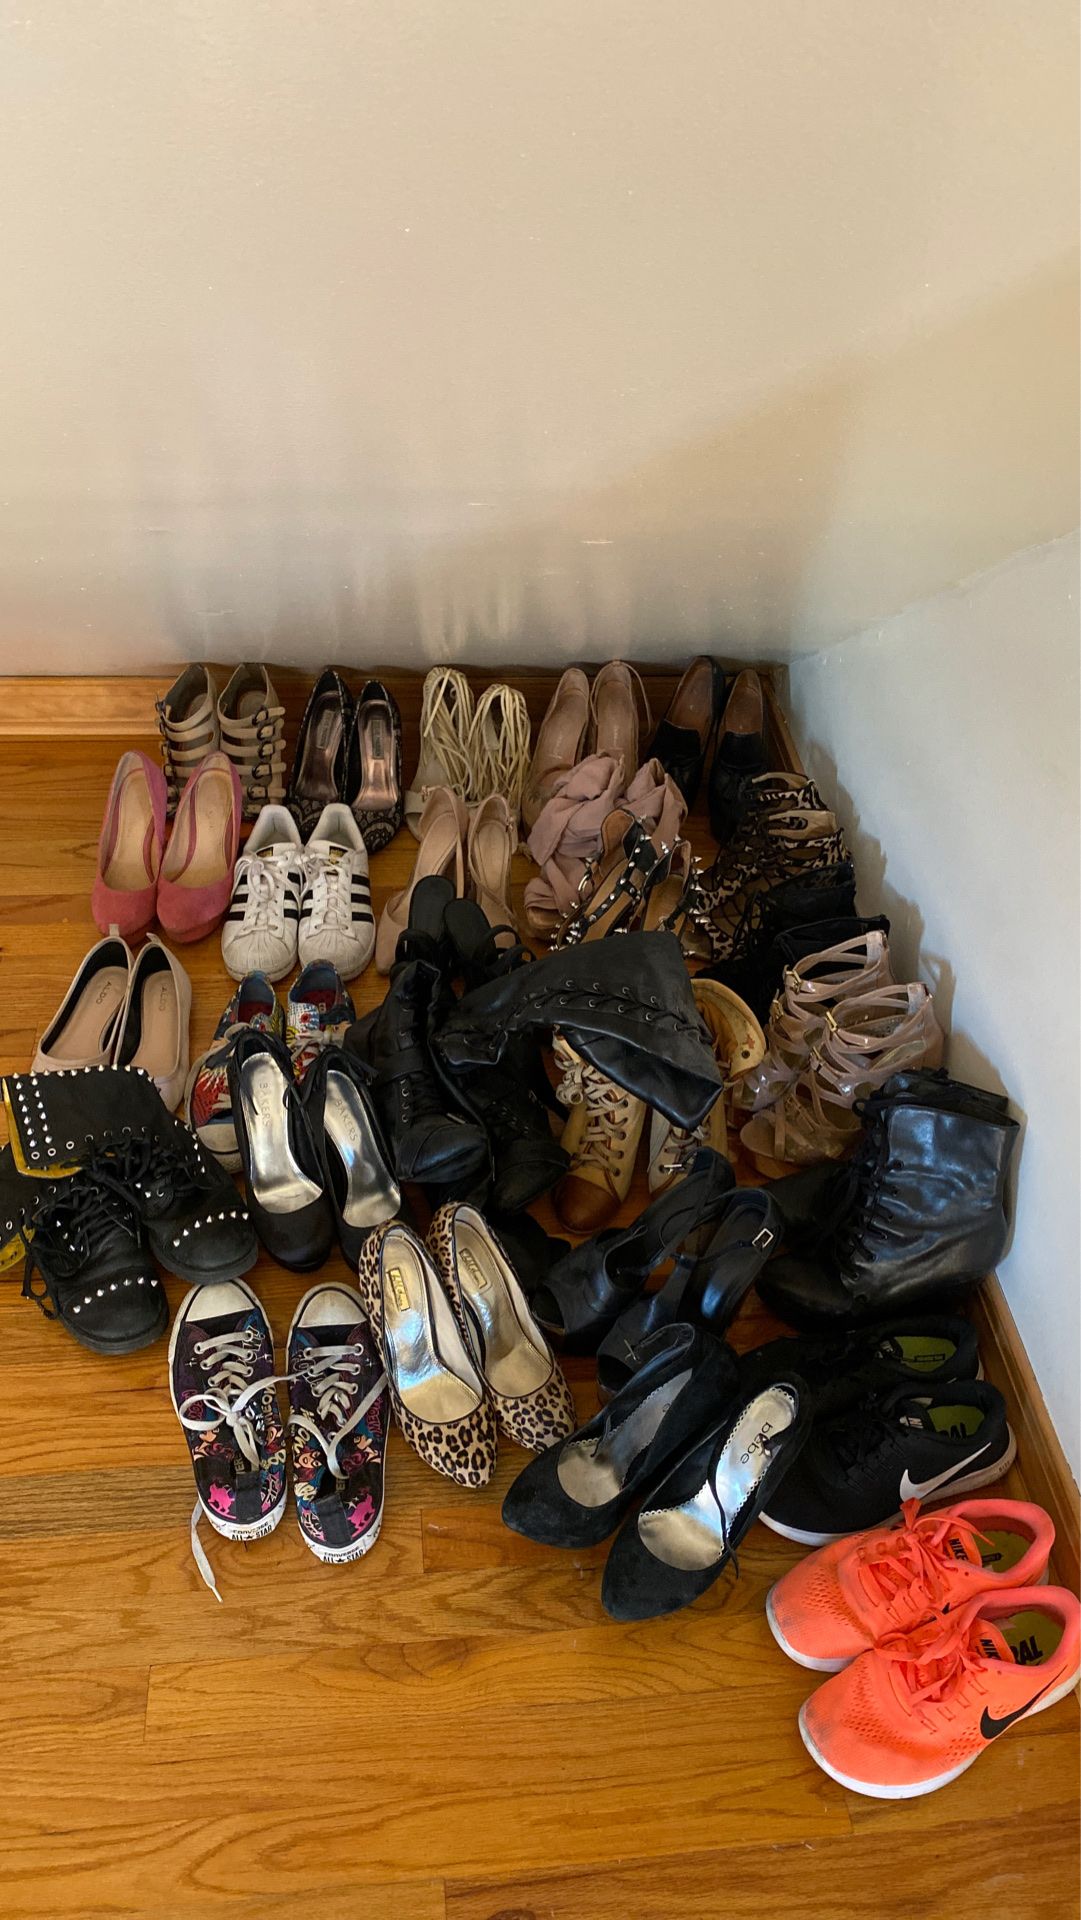 Shoe Collection, Size 7, including Jeffrey Campbell!